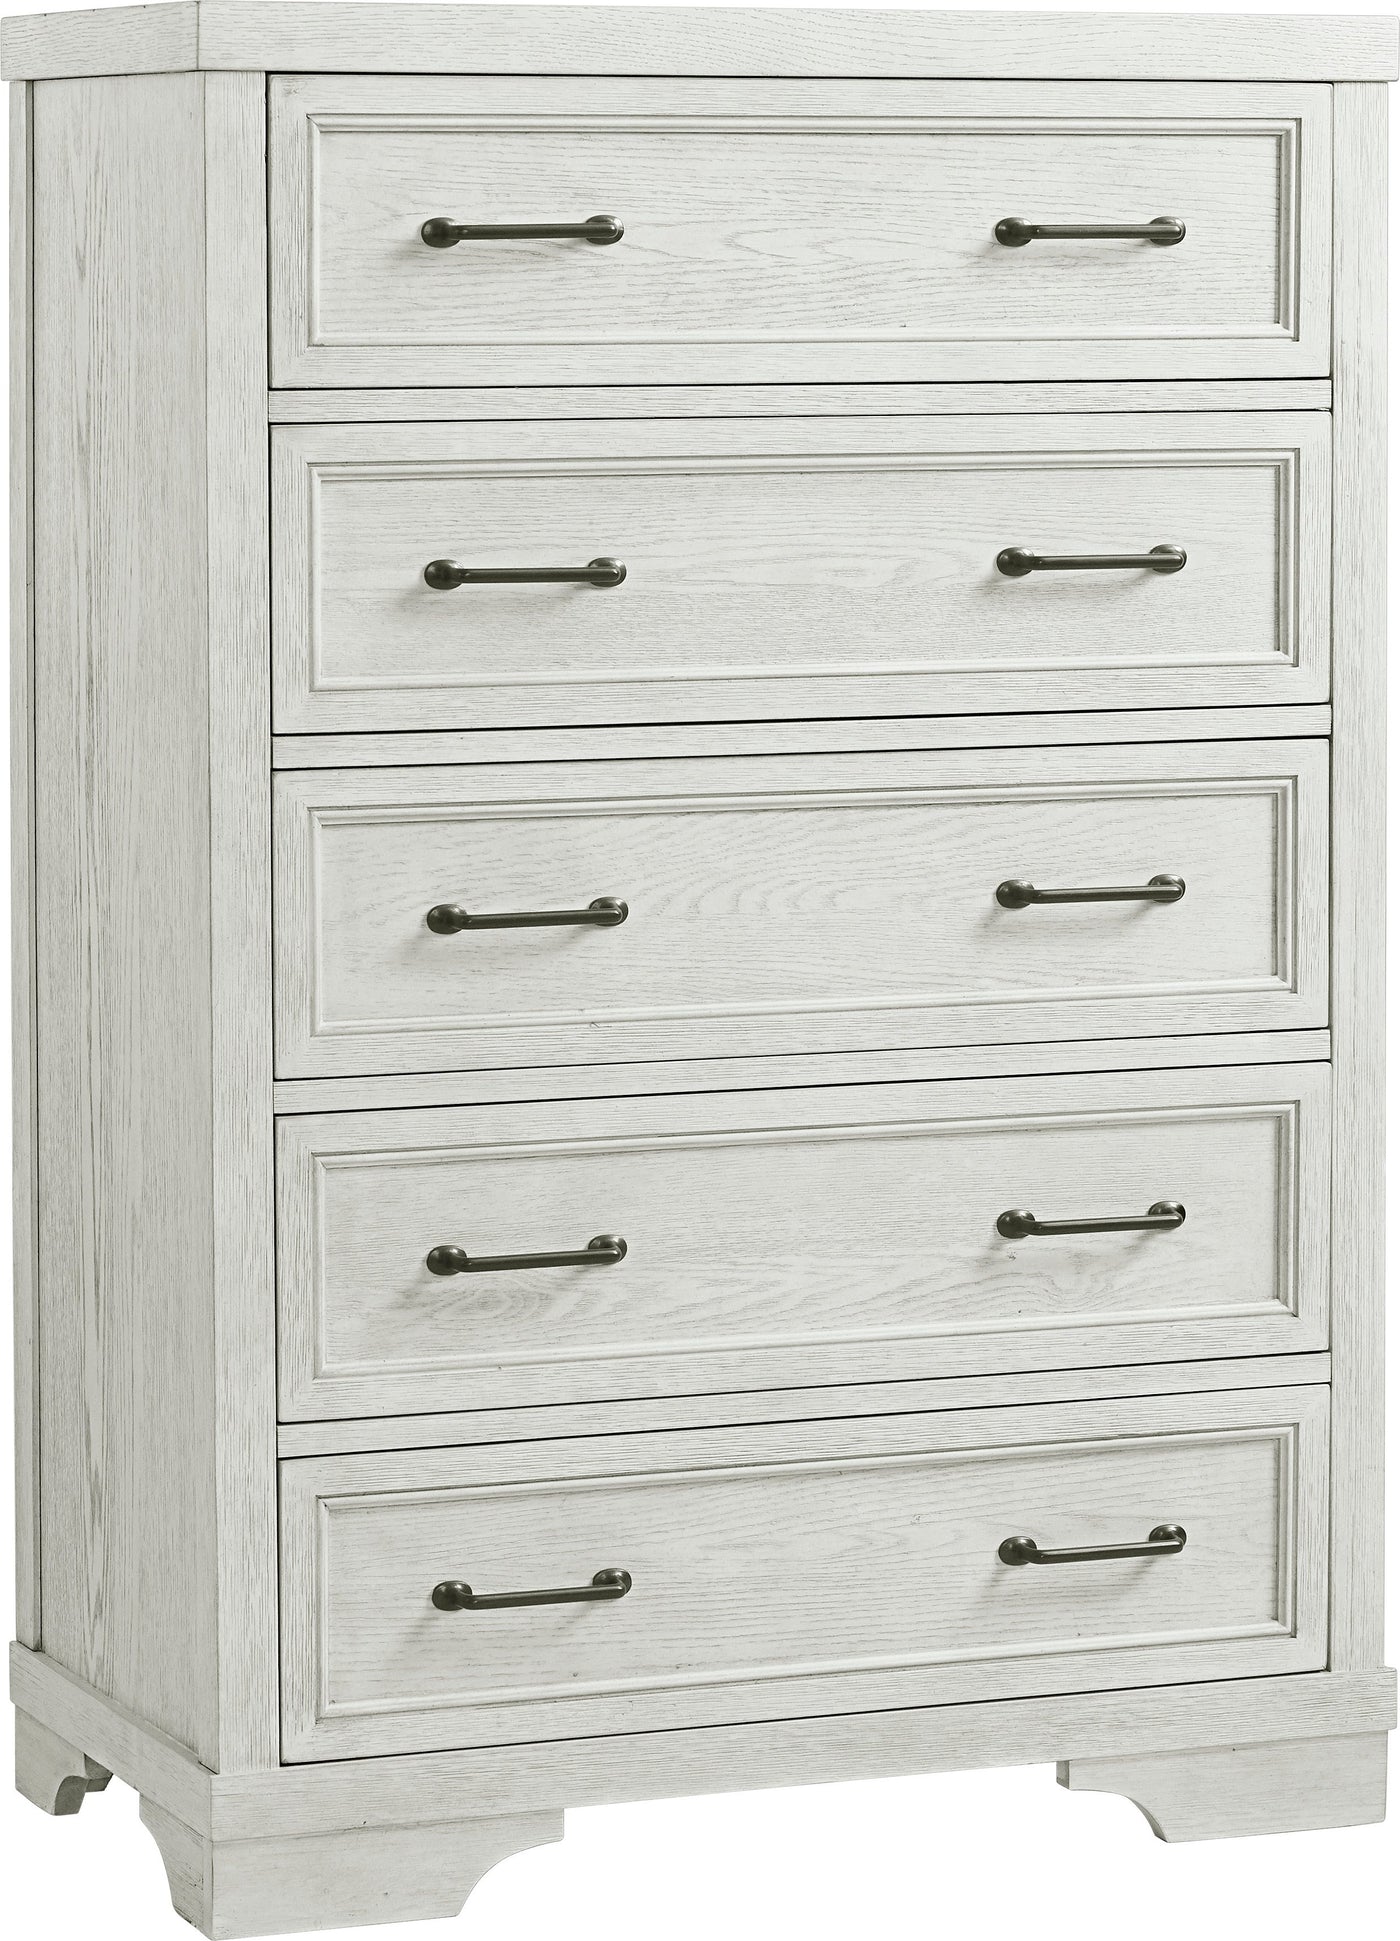 Foundry 5 Drawer Chest - White